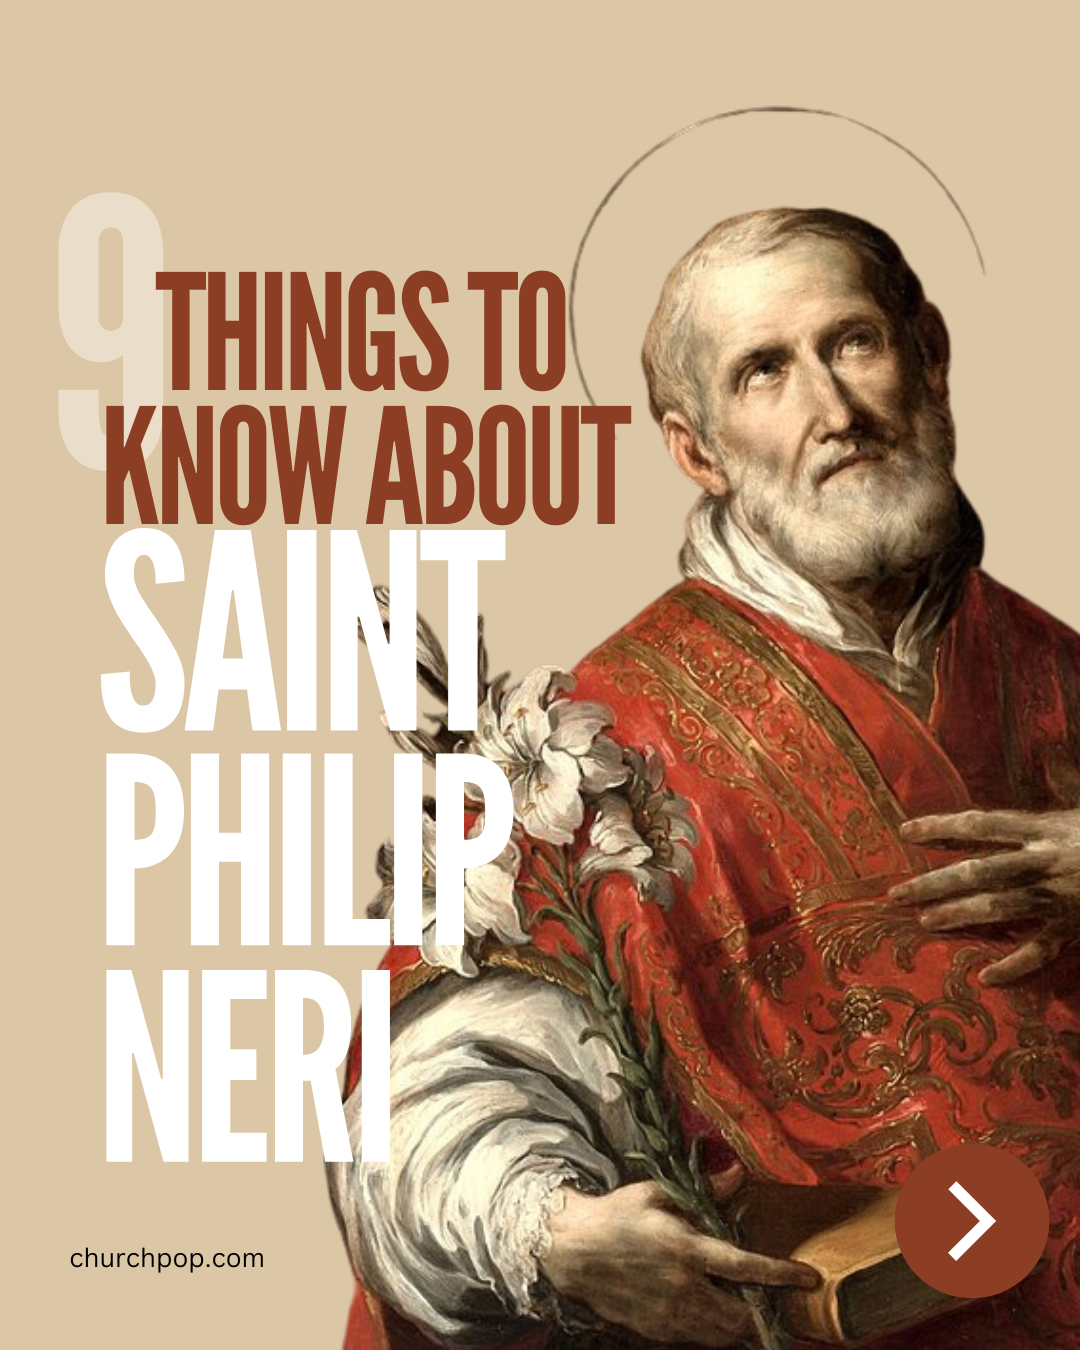 St. Philip Neri, Patron Saint of Humor: 9 Amazing Things to Know & Share